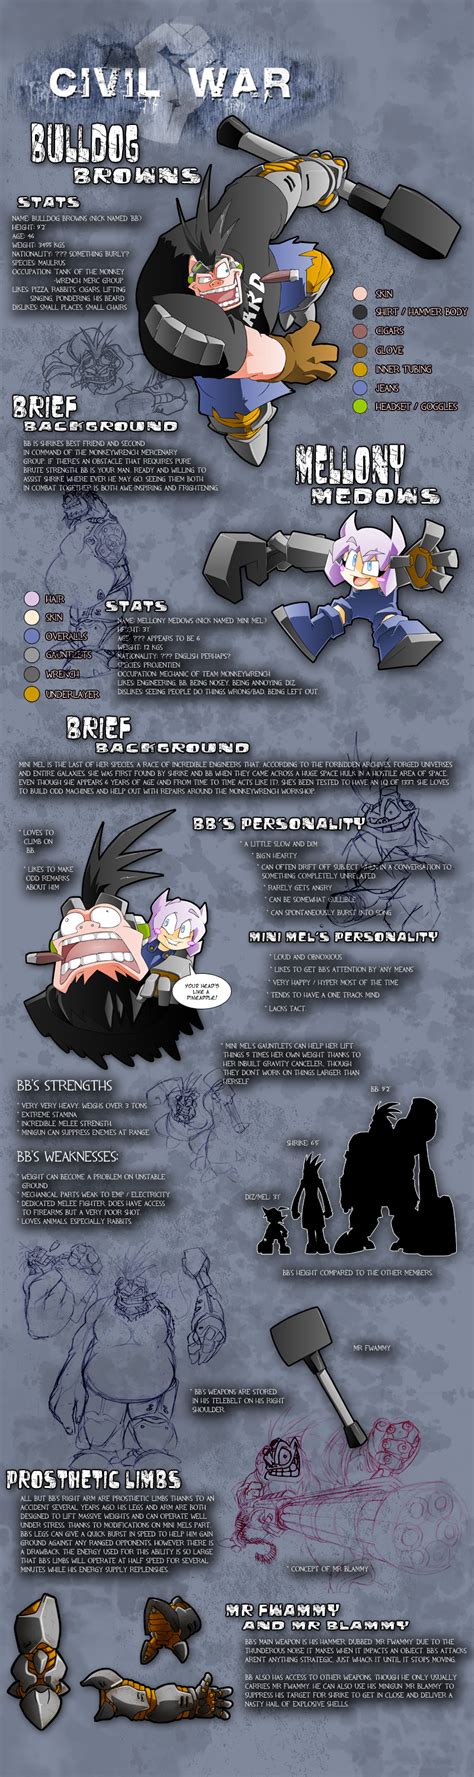 Bb Reference By Zeurel On Newgrounds